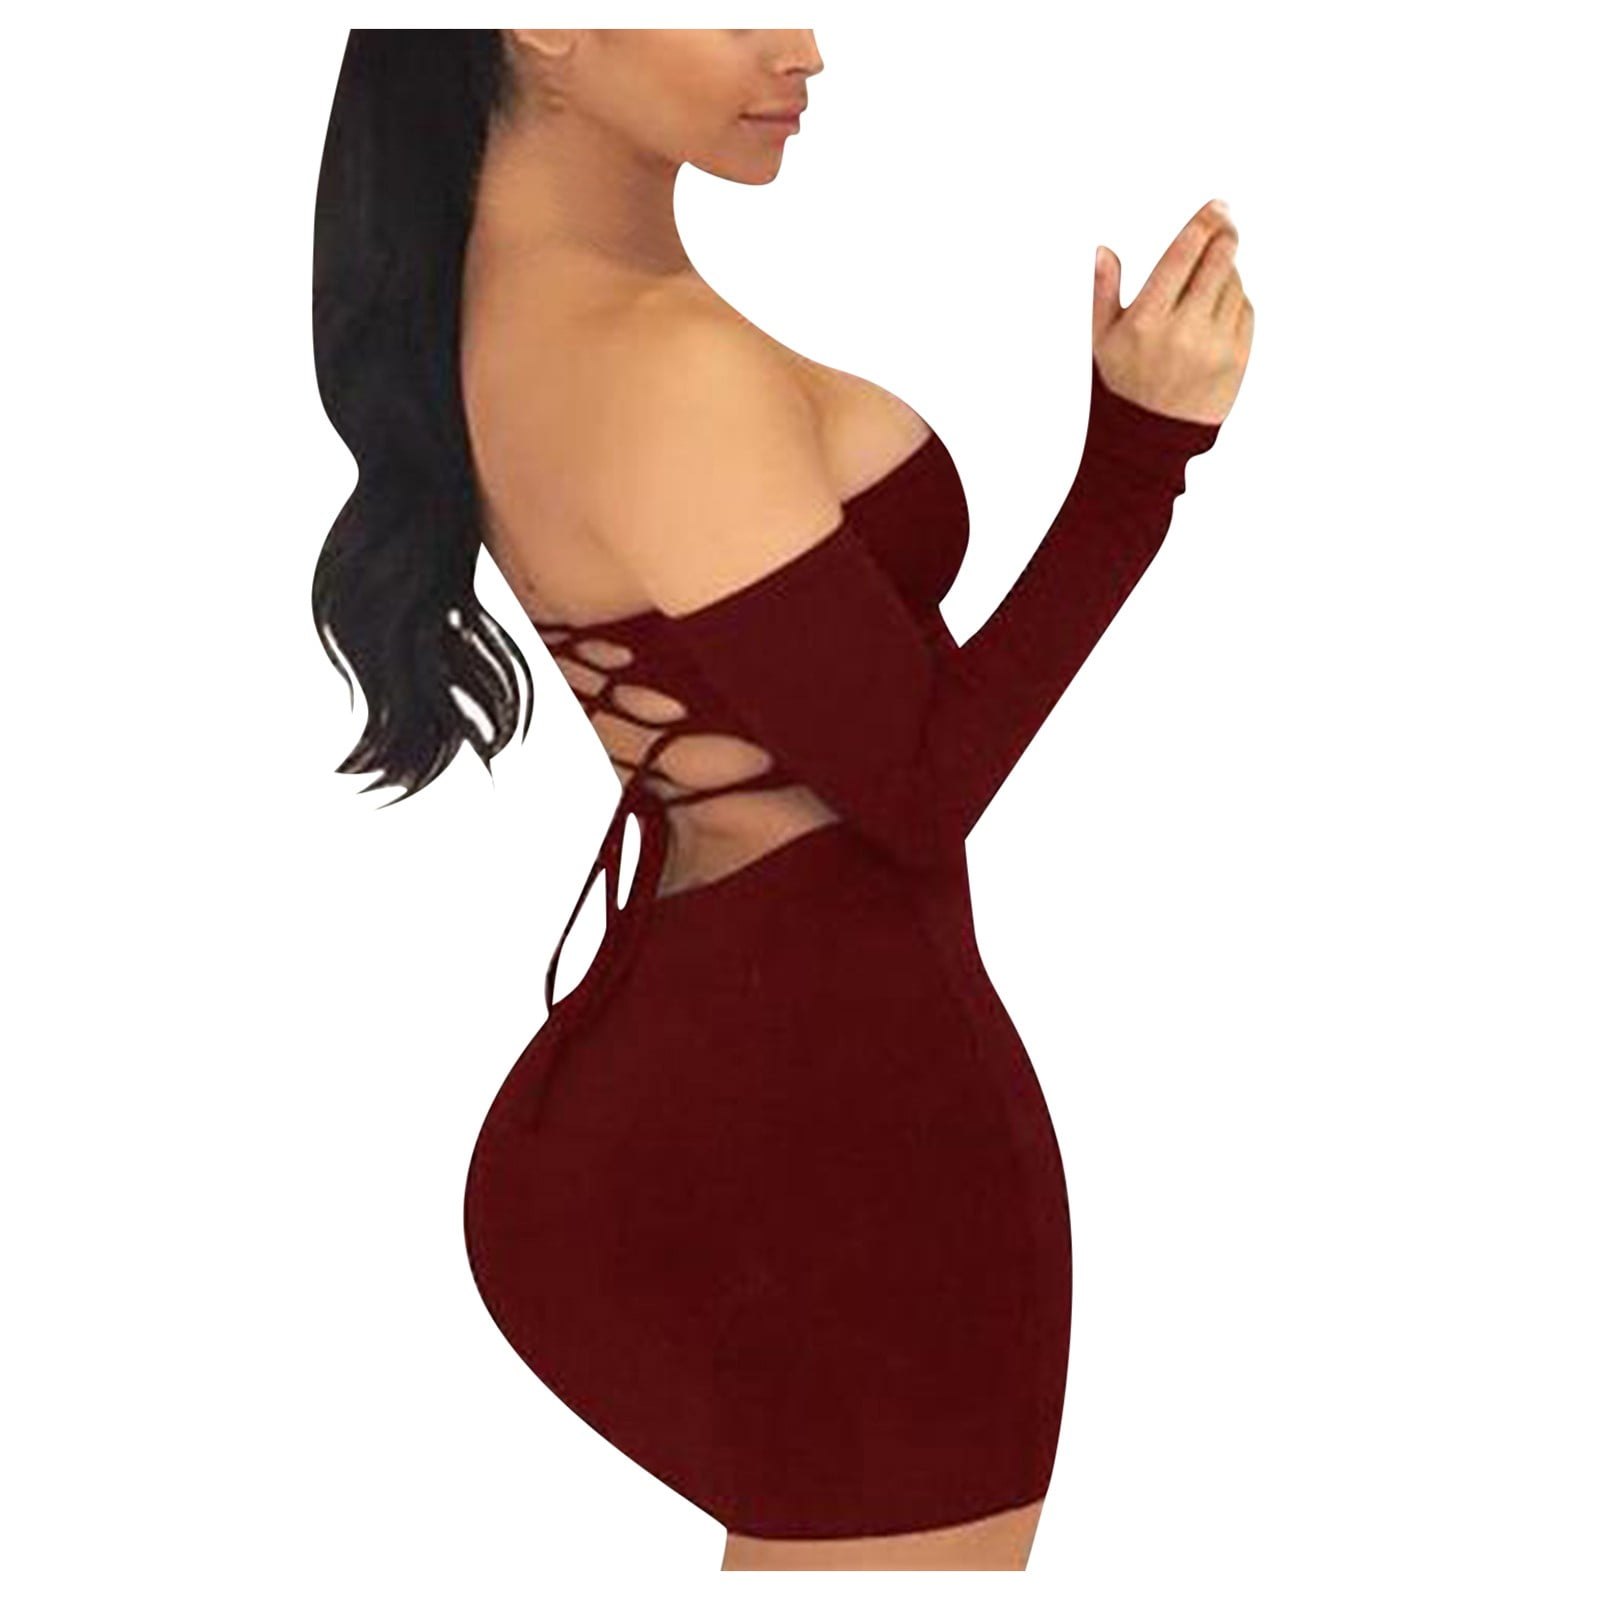 Sexy Tight Dress Red - Ziloco Women's Sexy Tight Slim Elegant Hollow Out Flat Shouders Dress gold  dresses for women elegant for party ,Red ,M - Walmart.com